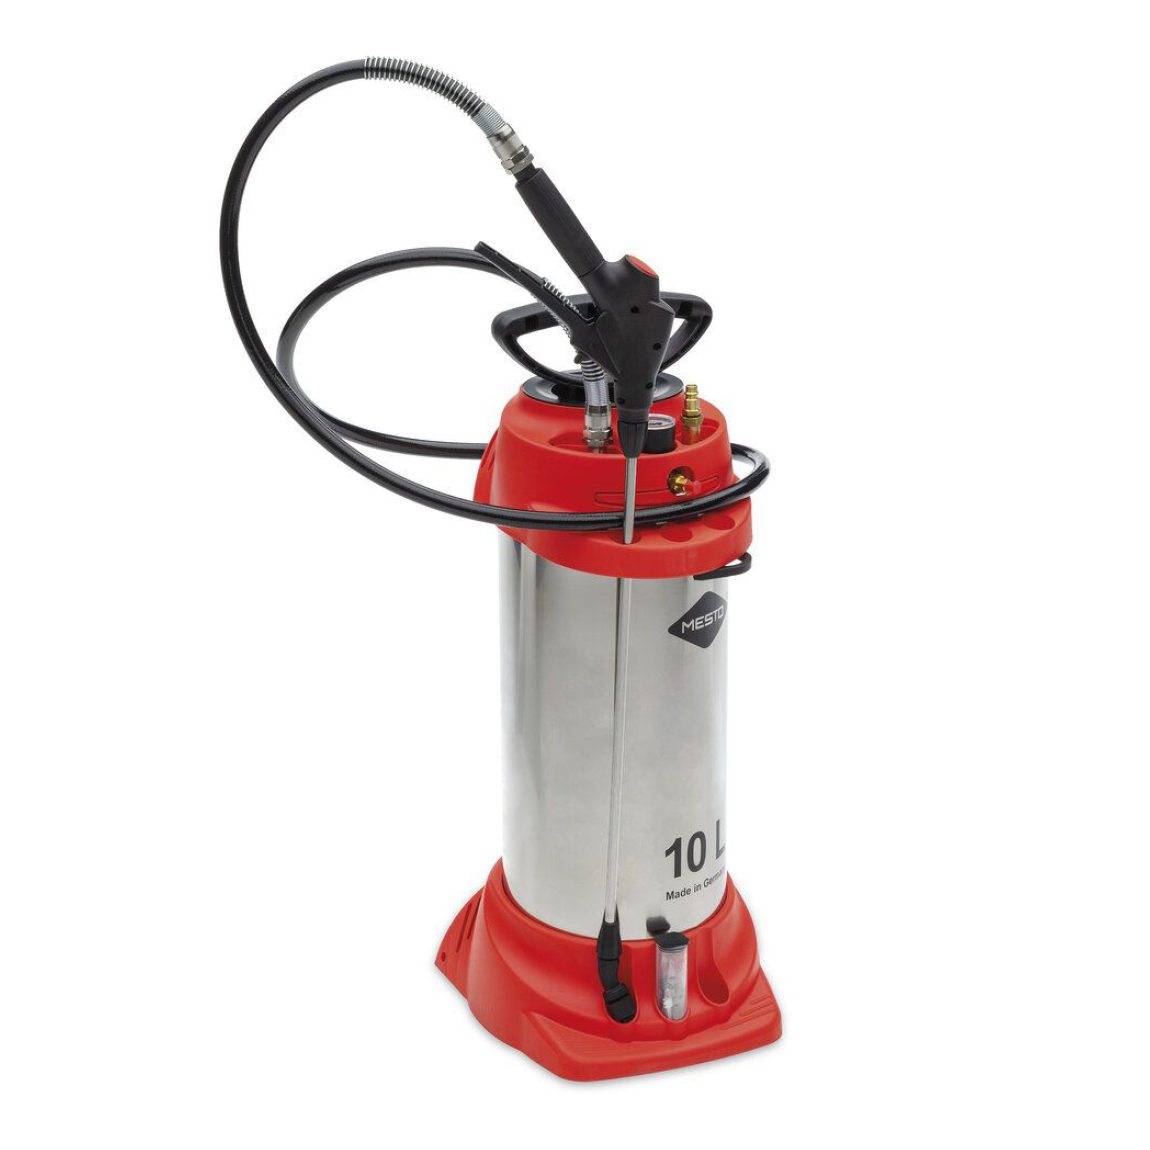 The Mesto 10 Litre Inox Super Xtreme is Mesto's top of the line manual compression sprayer. Designed to be exceptionally chemical resistant. It is designed with it's viton\FPM seals to spray tough site chemicals such as Sika's Proseal Pro floor sealer. Av